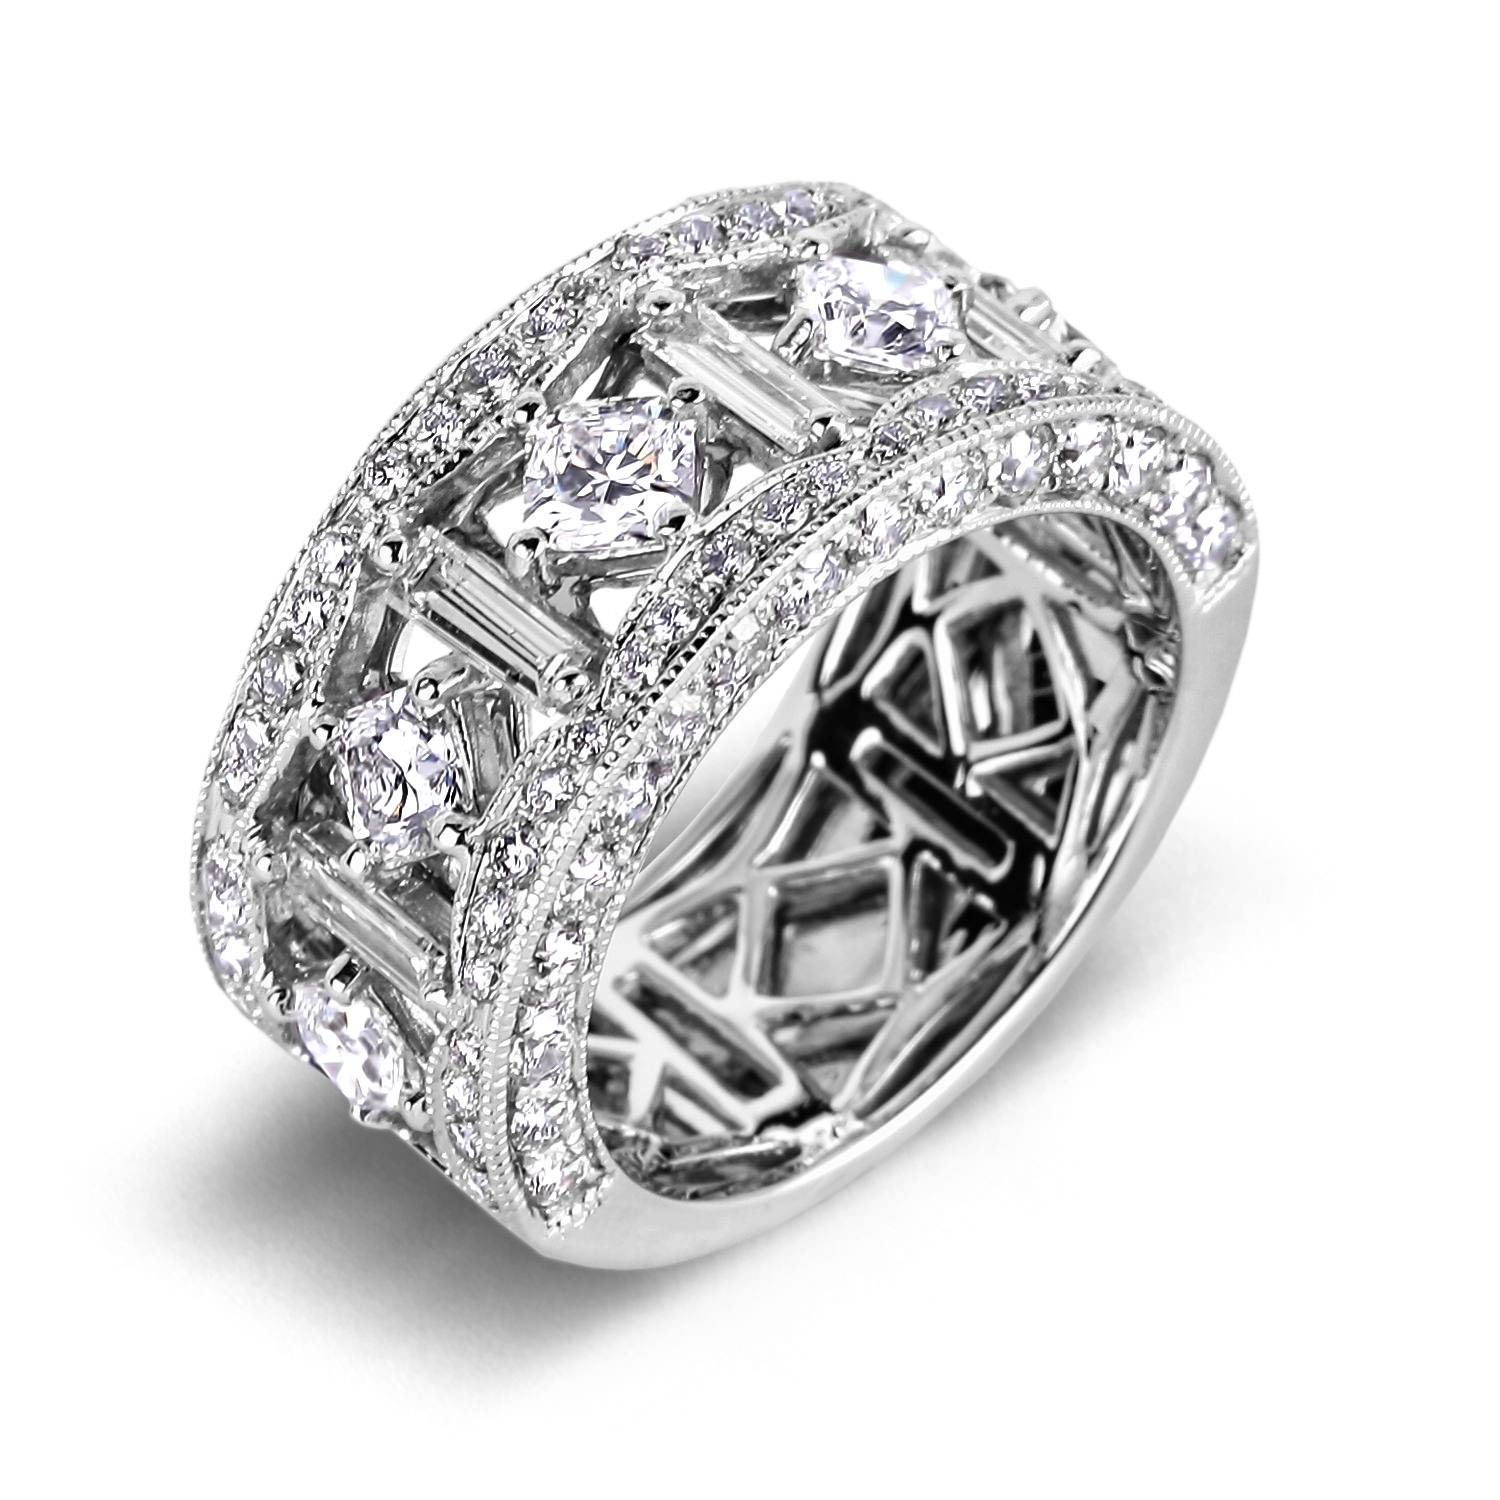 Diamond Anniversary Rings – Sgr879 – Anaya Fine Jewellery Collection Within Most Current Platinum Anniversary Rings (View 25 of 25)